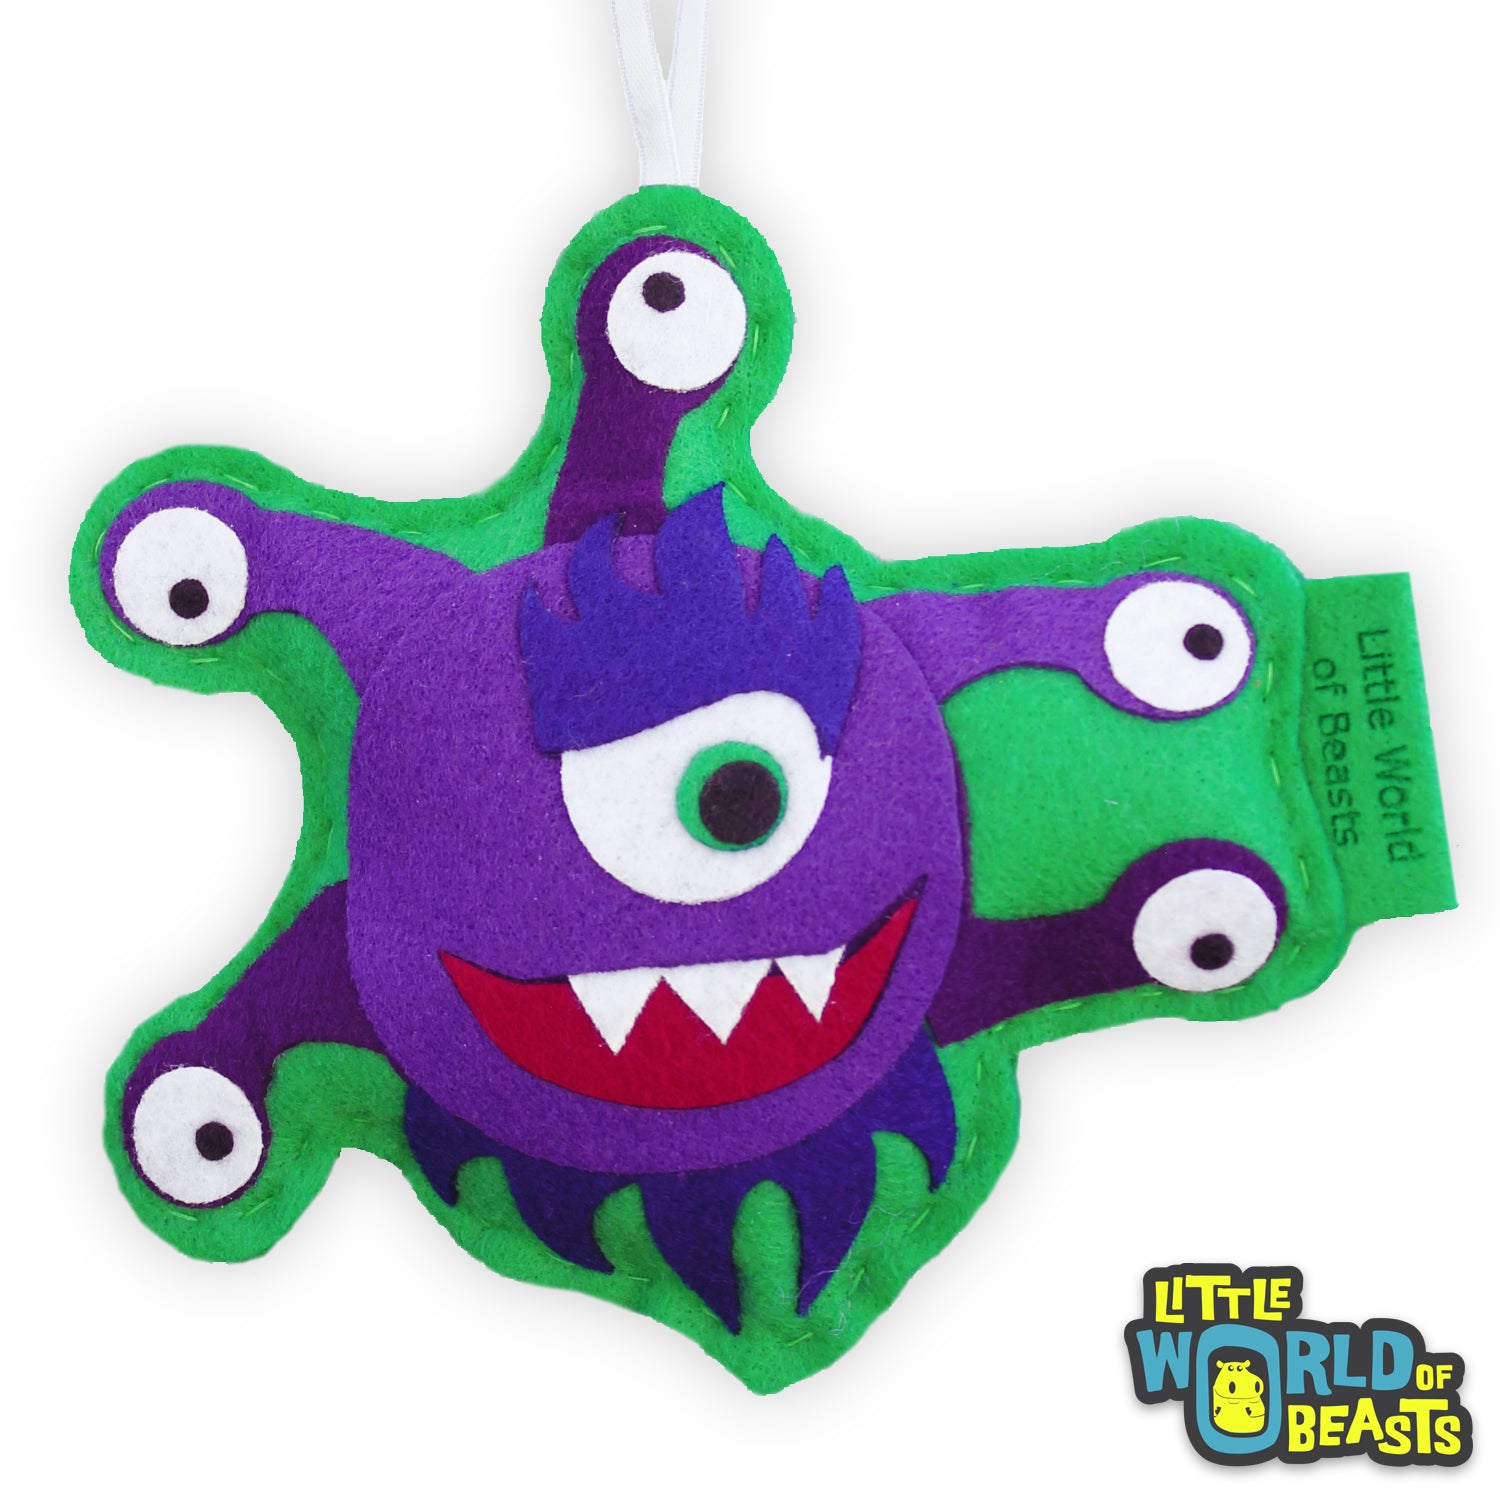 Personalized Ornament - DnD Monster- Beholder